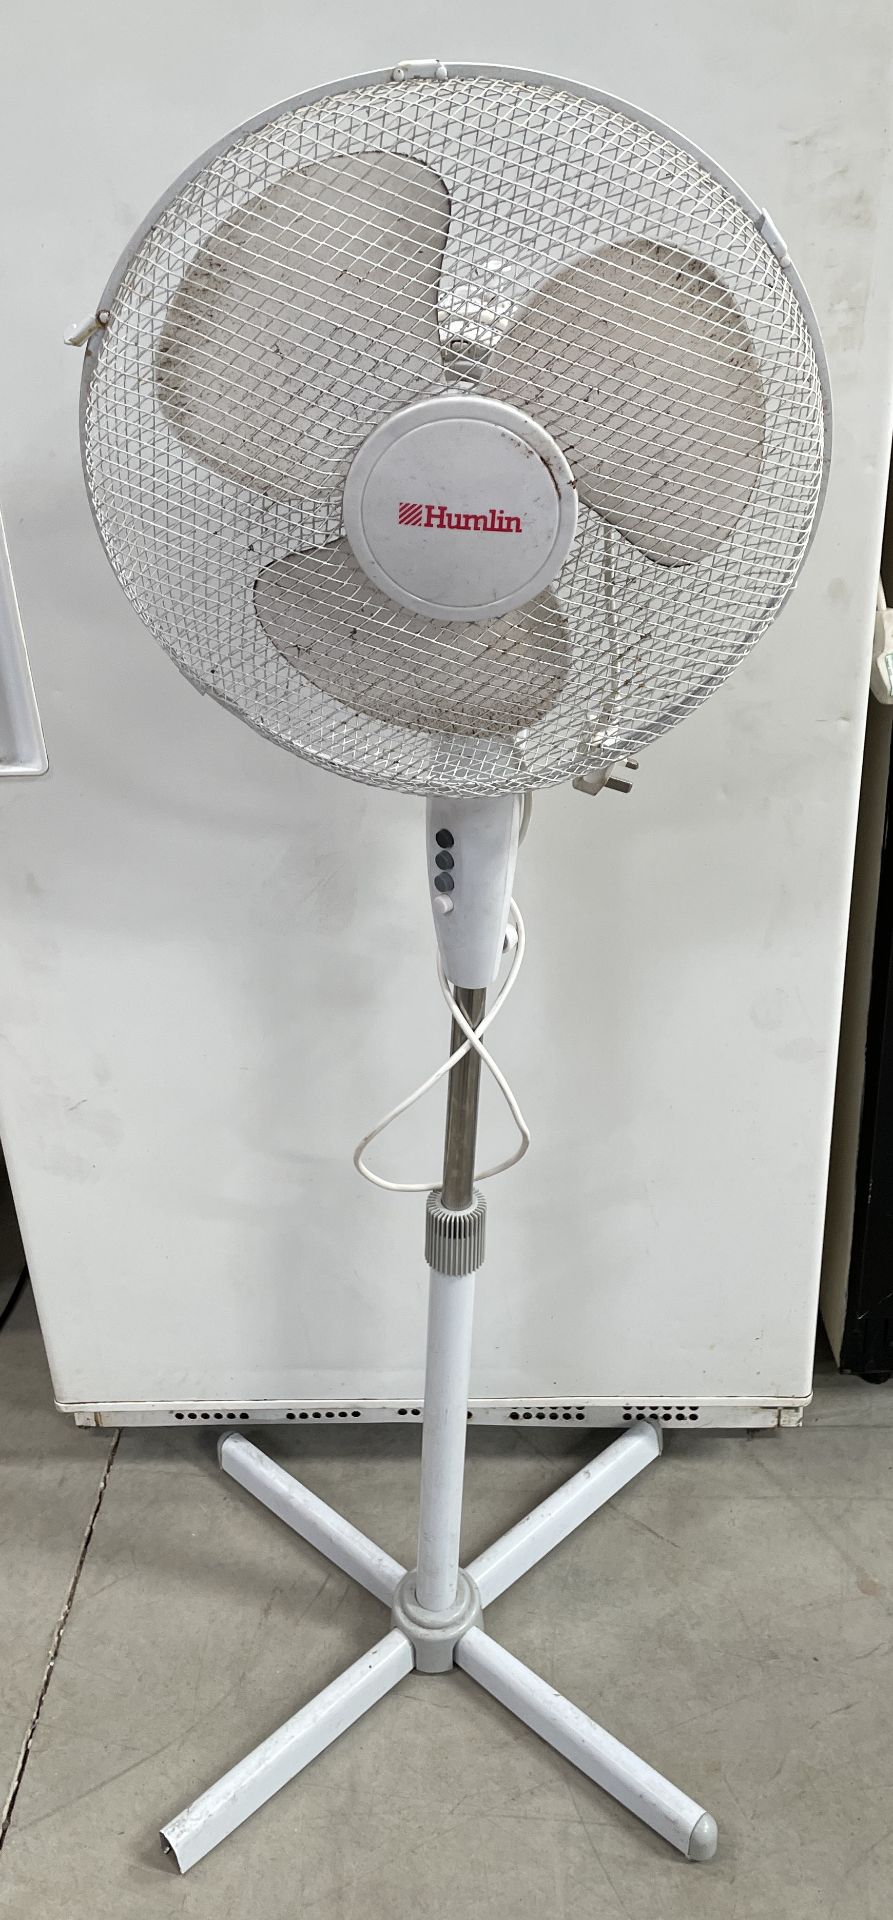 Two Humlin Pedestal Fans (Location Brentwood. Please Refer to General Notes)